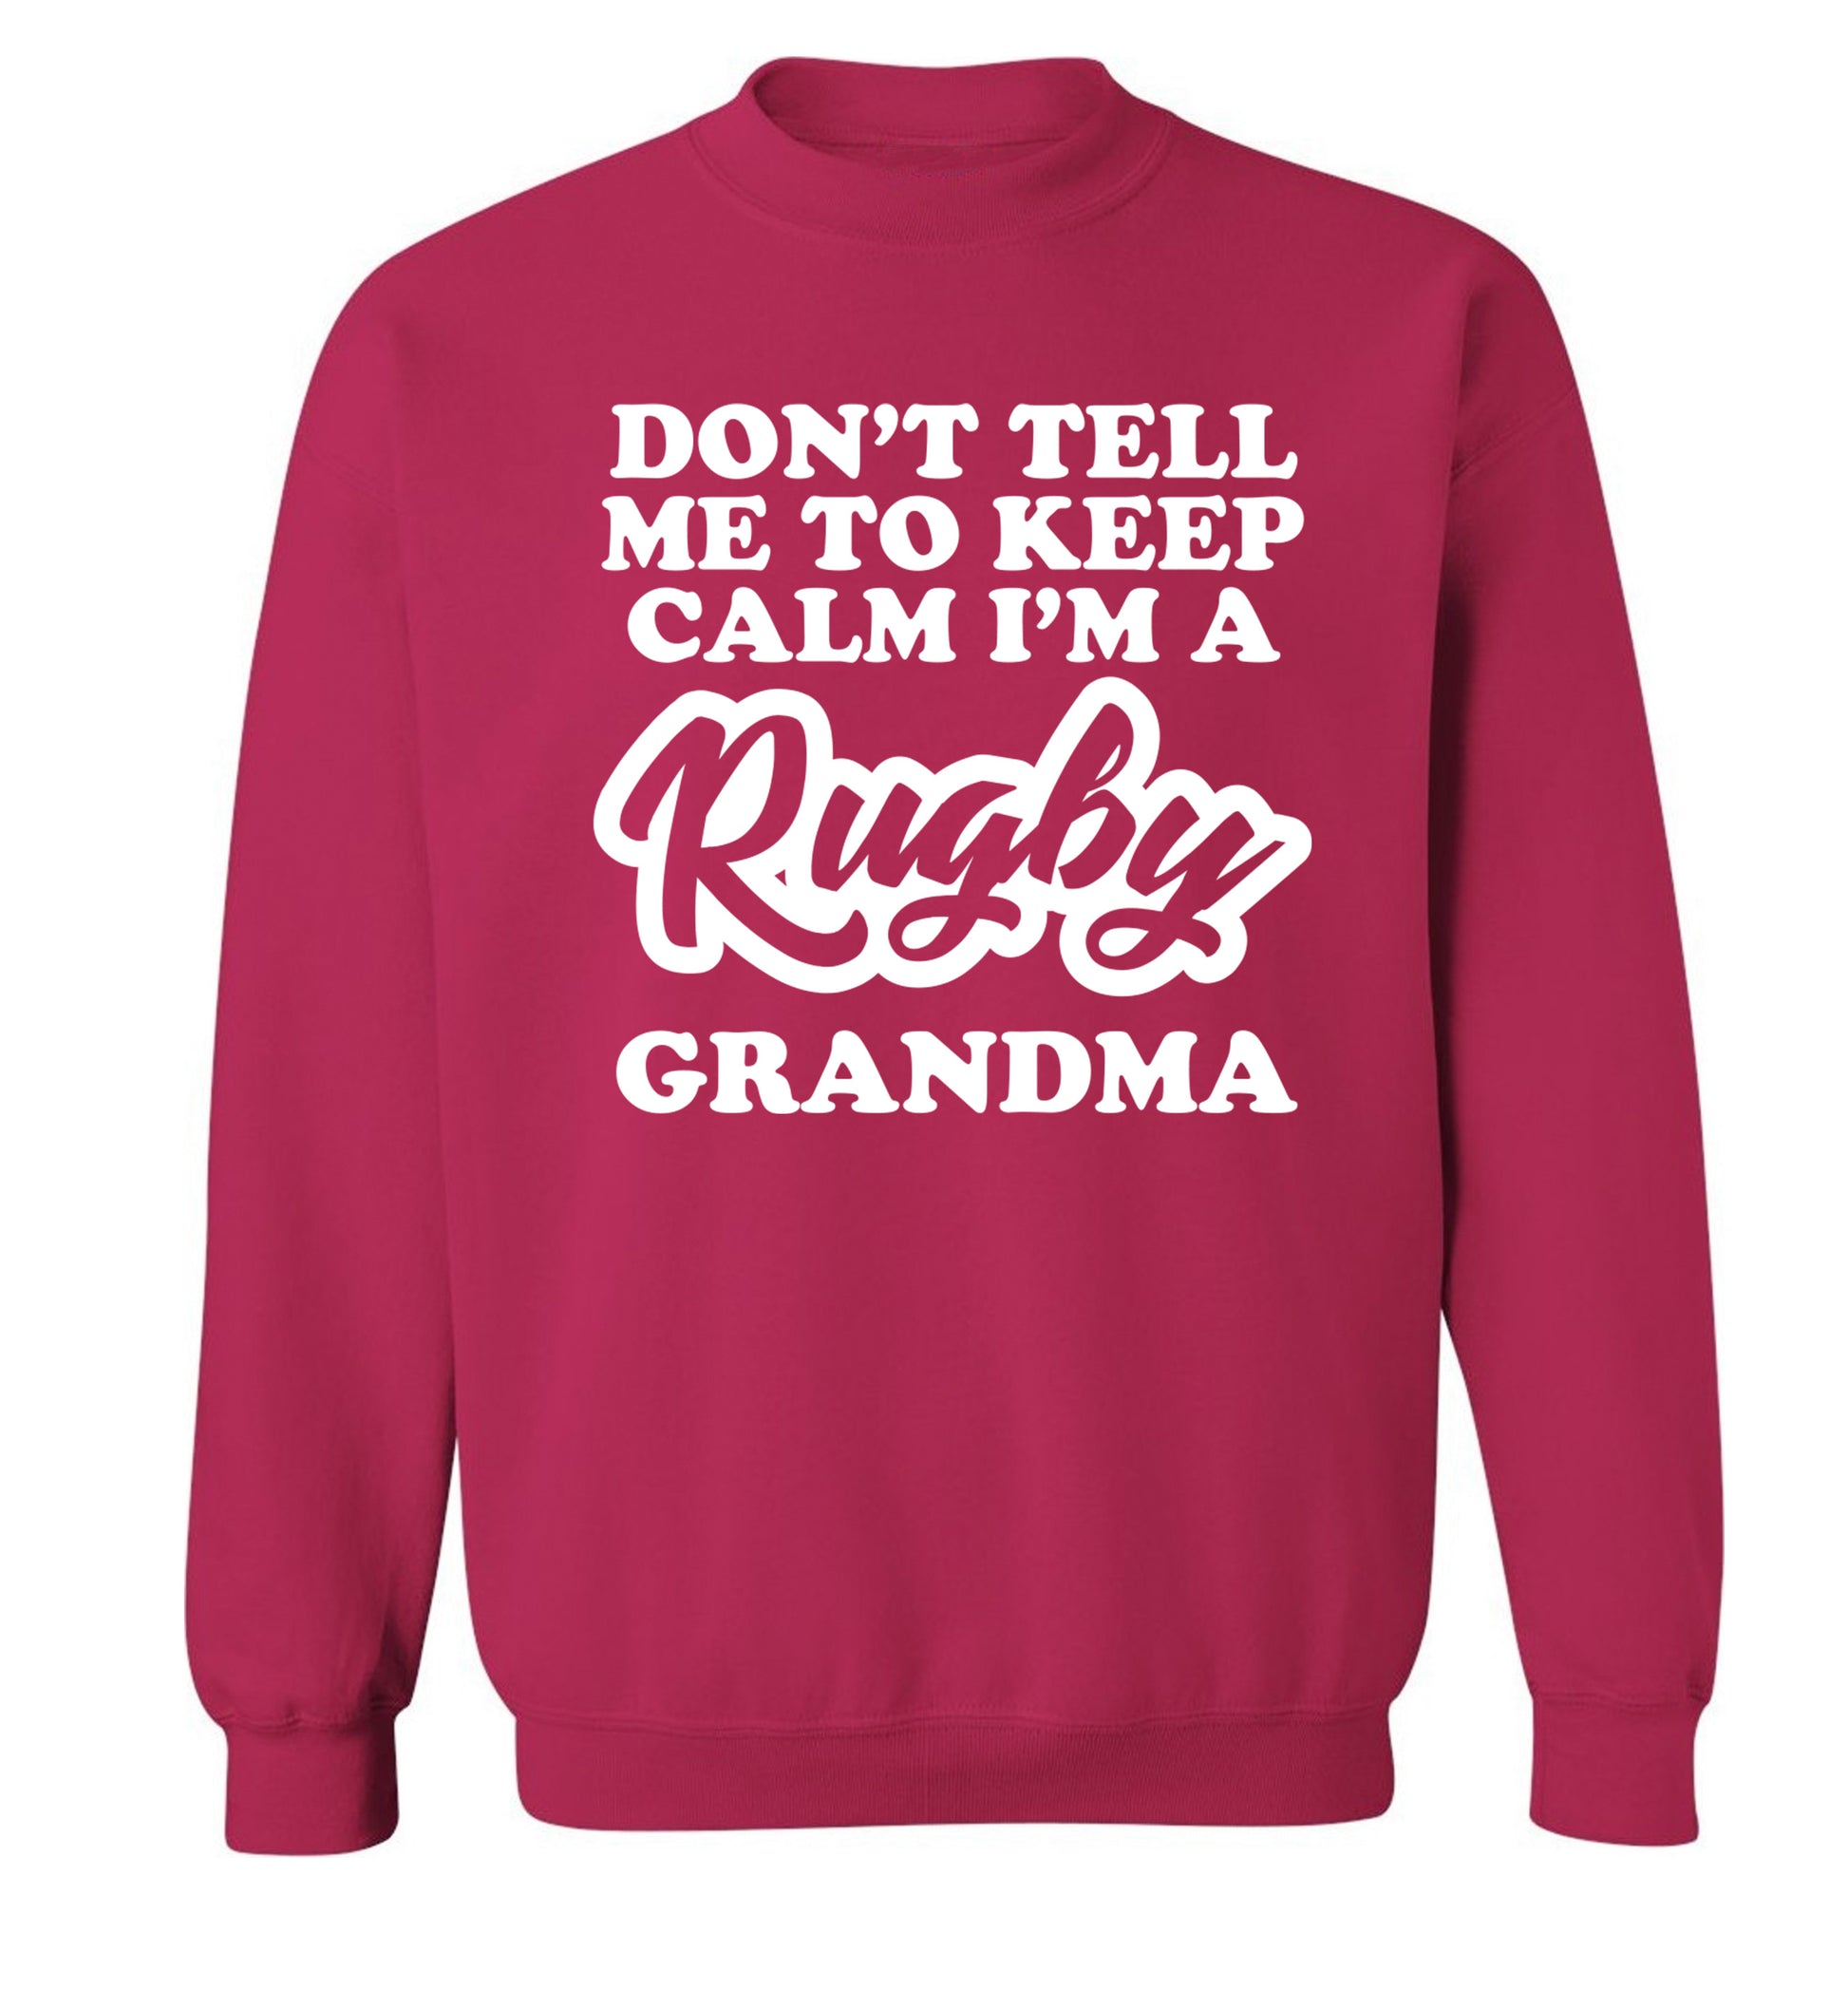 Don't tell me to keep calm I'm a rugby grandma Adult's unisex pink Sweater 2XL